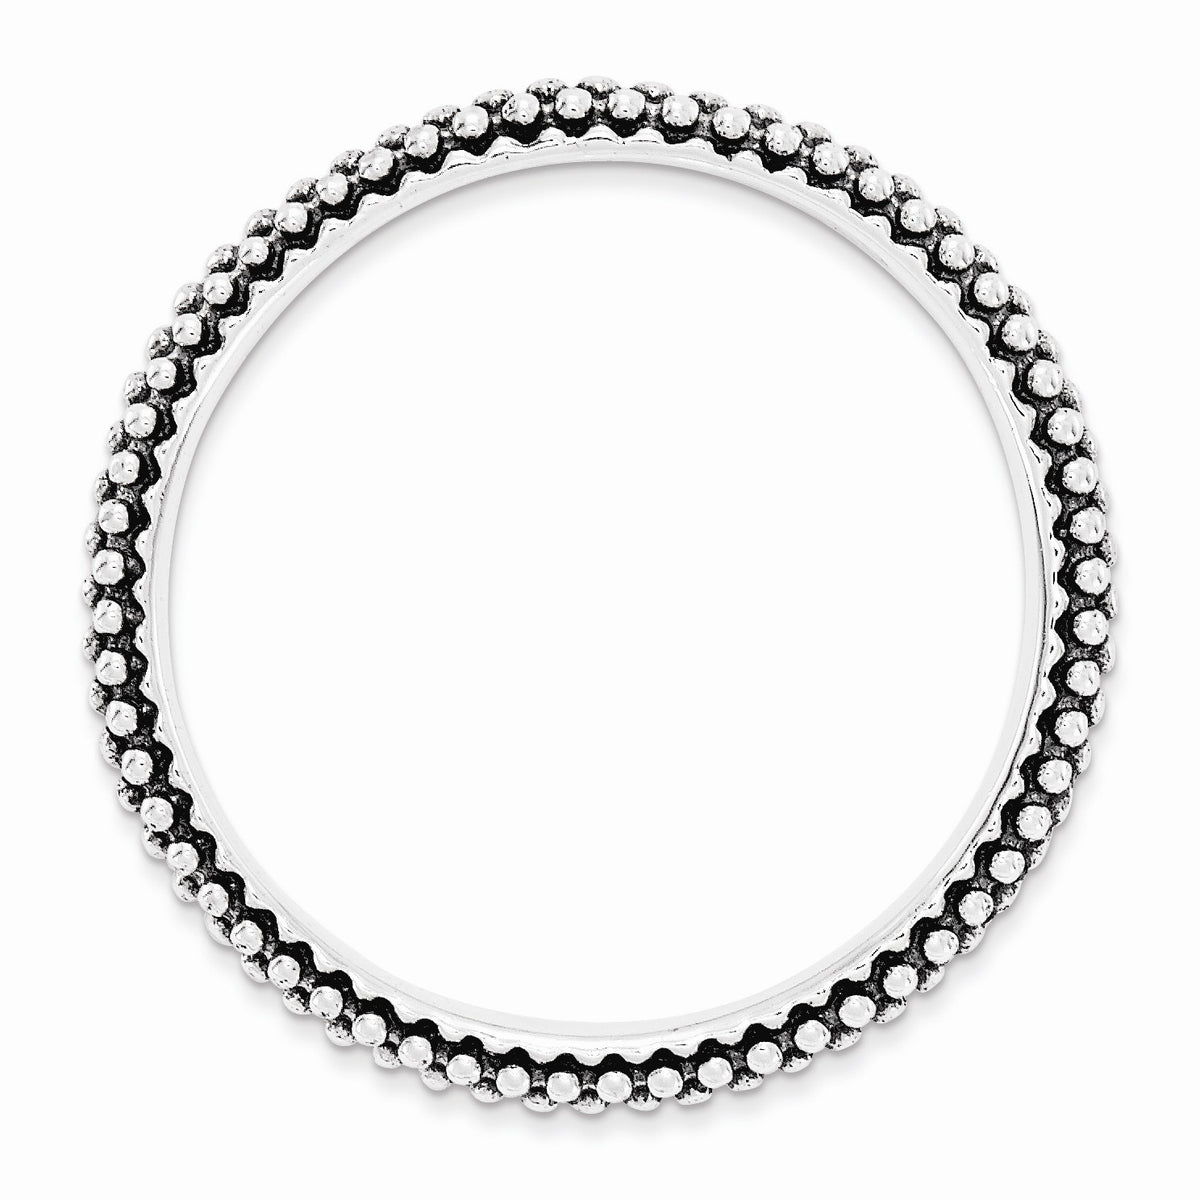 Alternate view of the 2.5mm Sterling Silver Stackable Antiqued Small Bead Band by The Black Bow Jewelry Co.